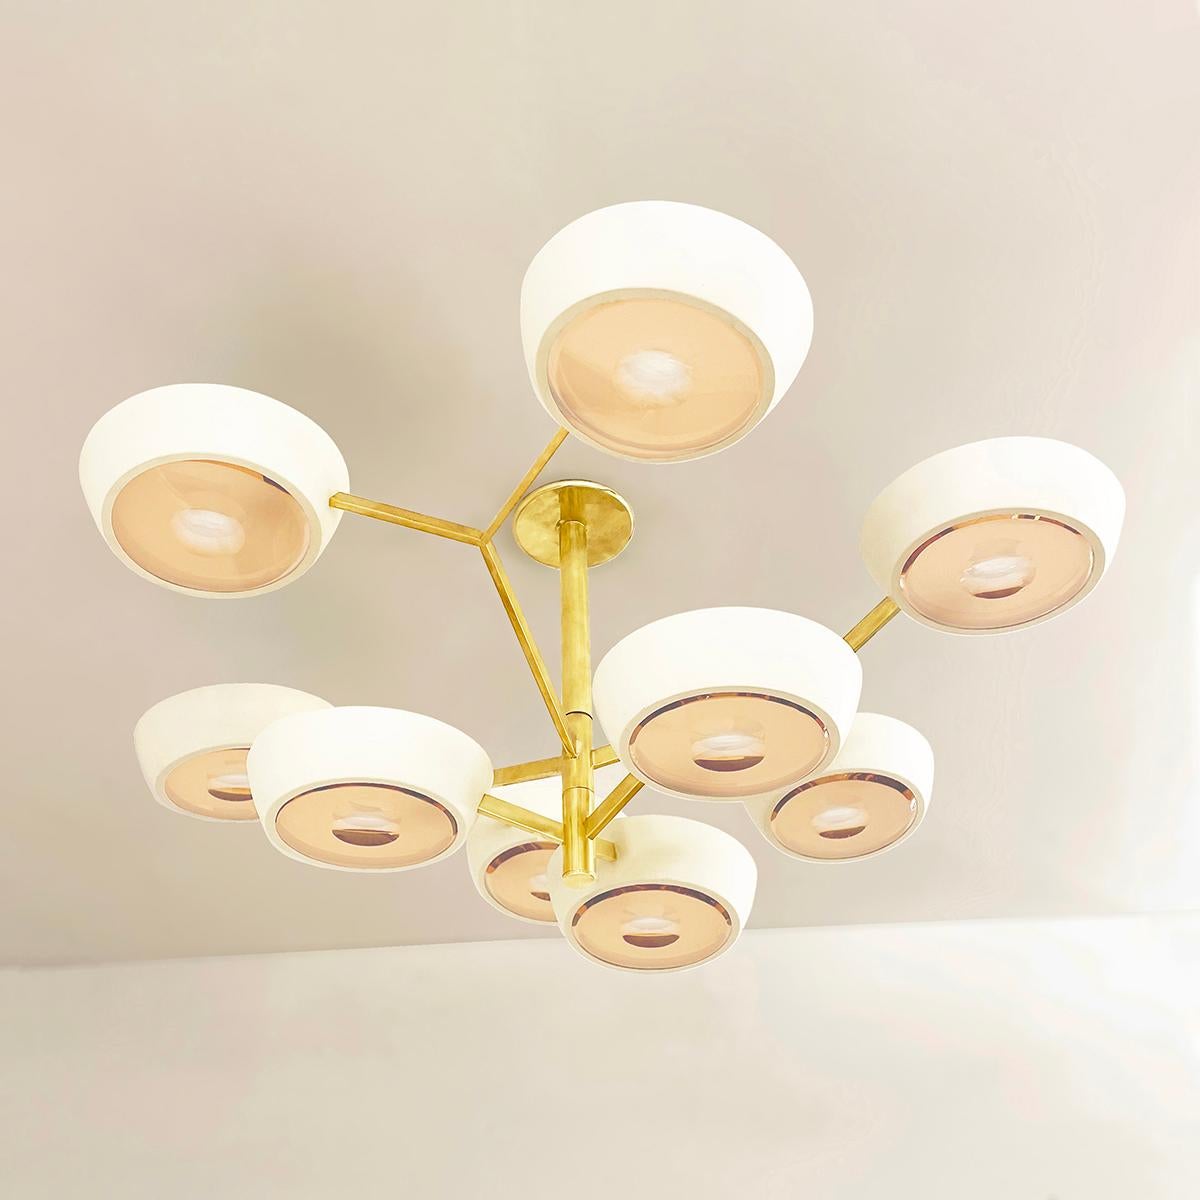 Italian Rose Ceiling Light by Form A